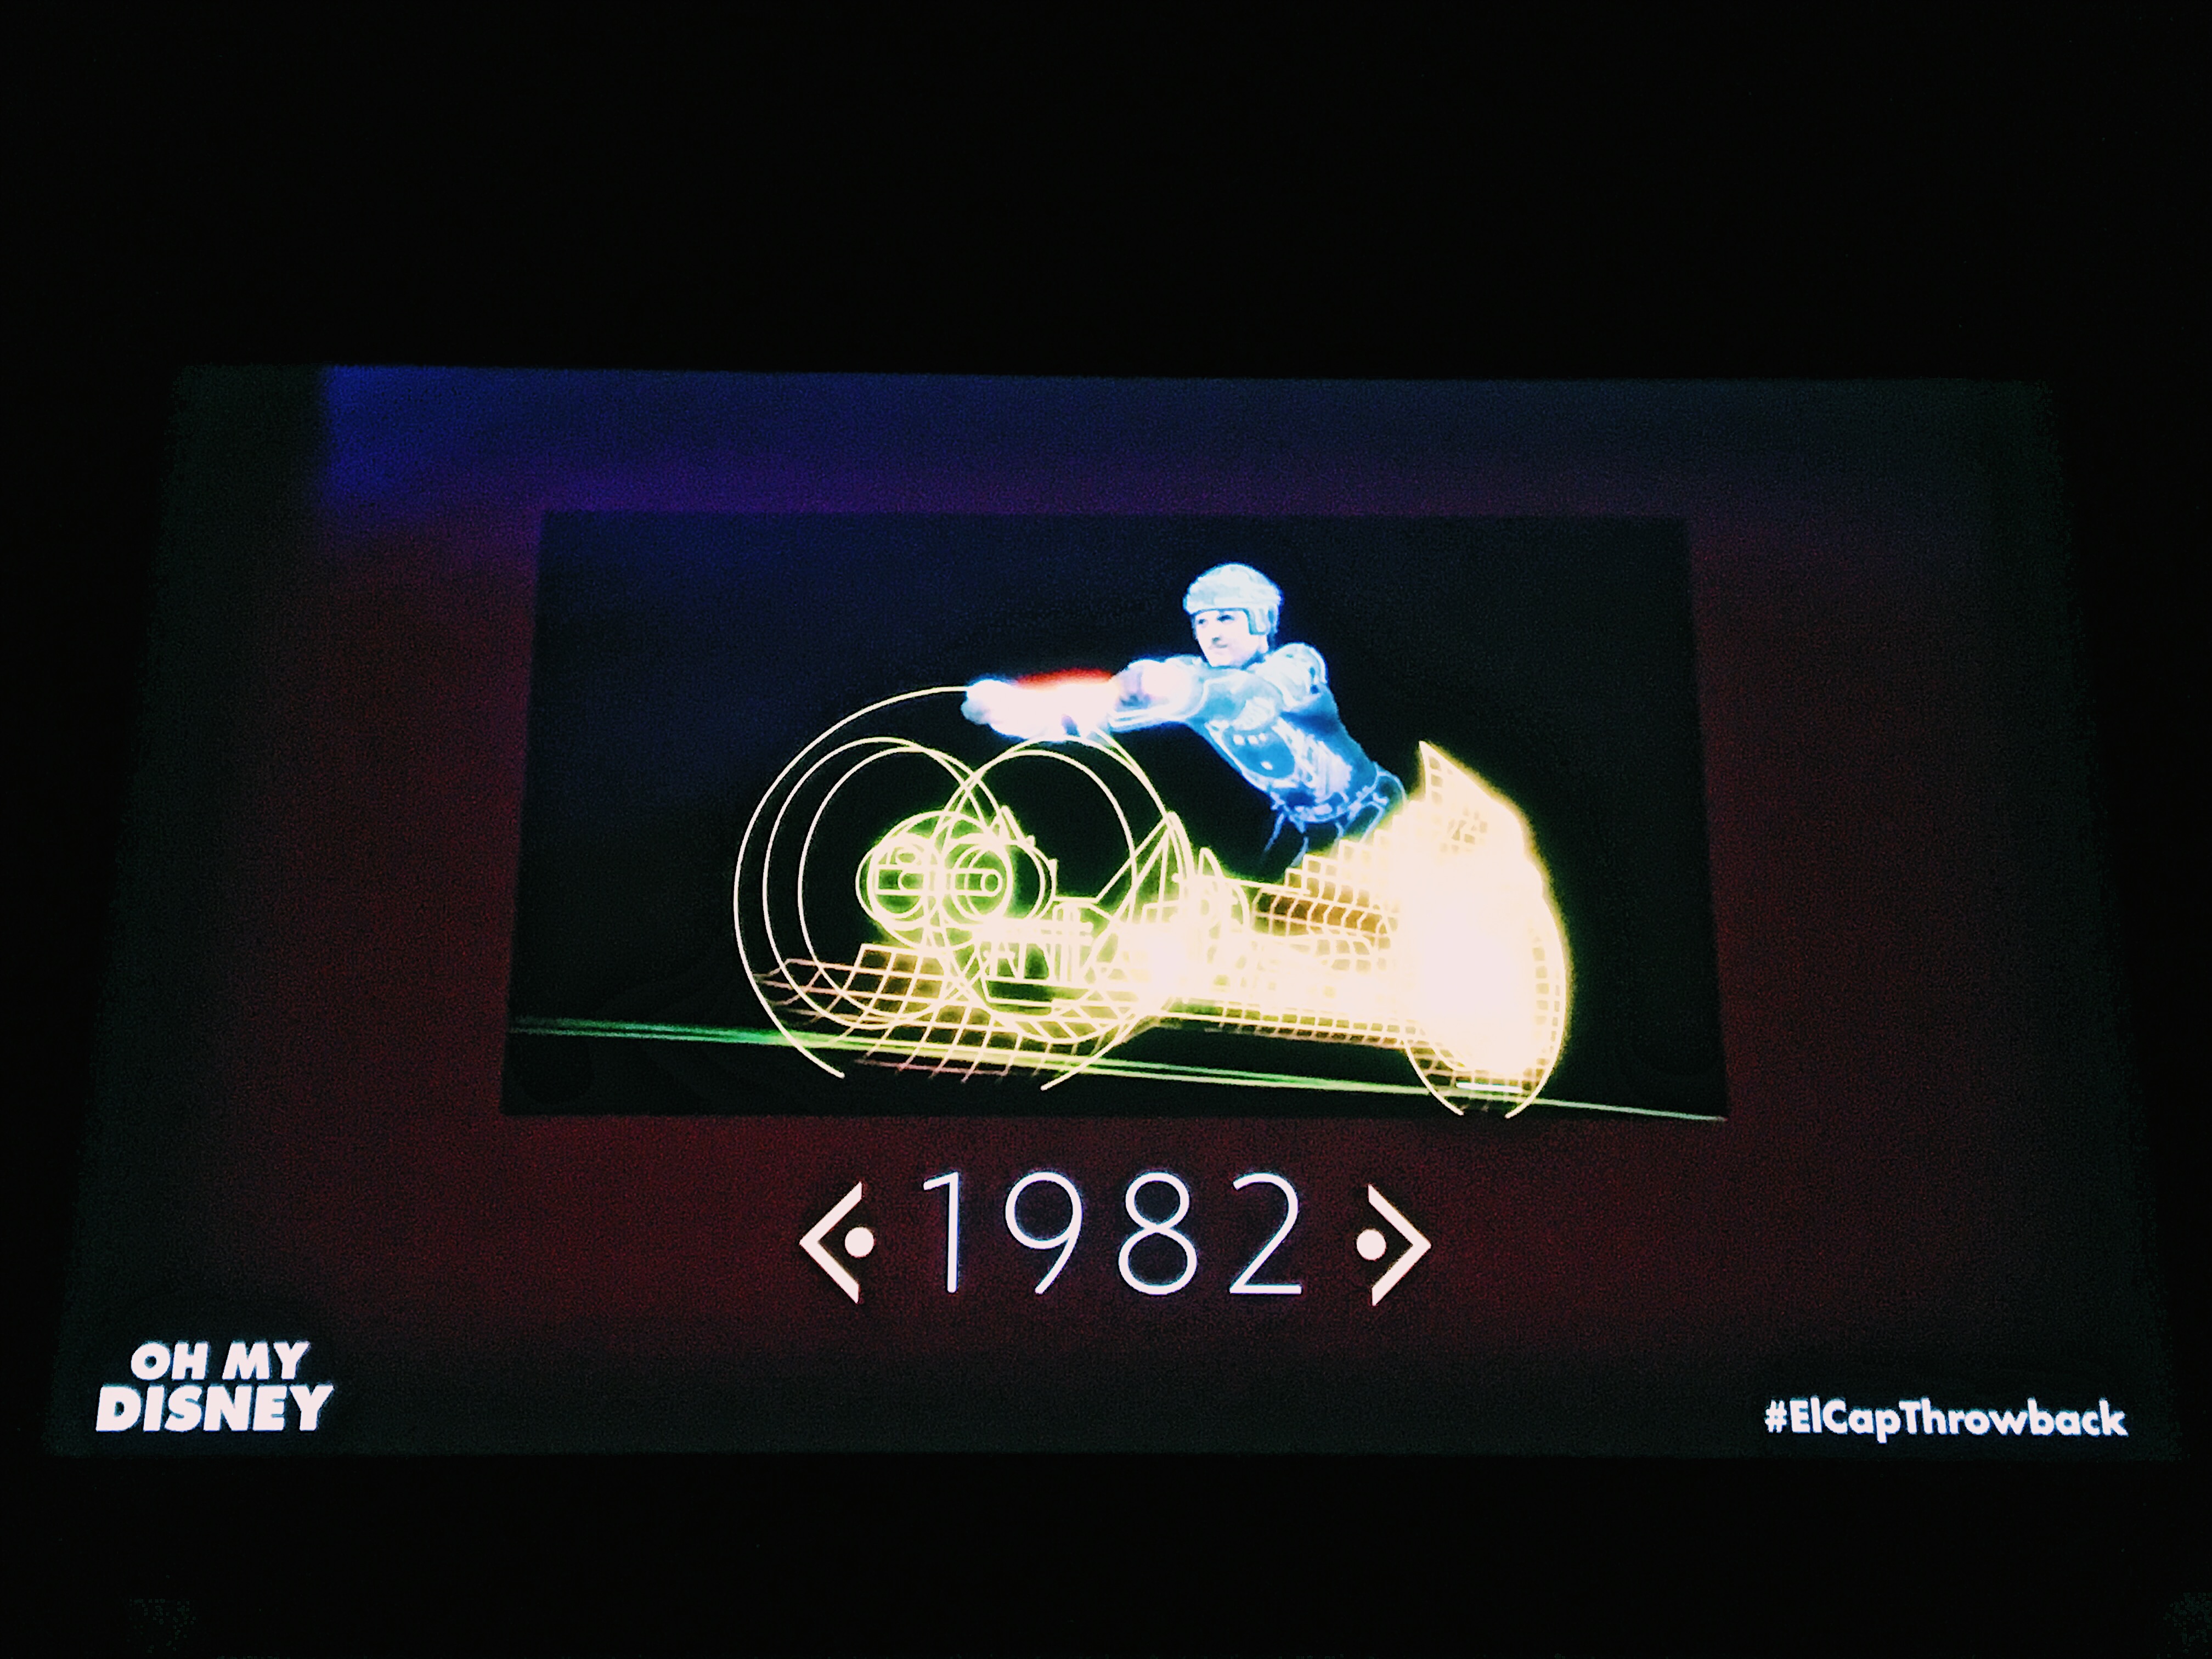 Fans take a crack at movie trivia about Tron and Tron Legacy